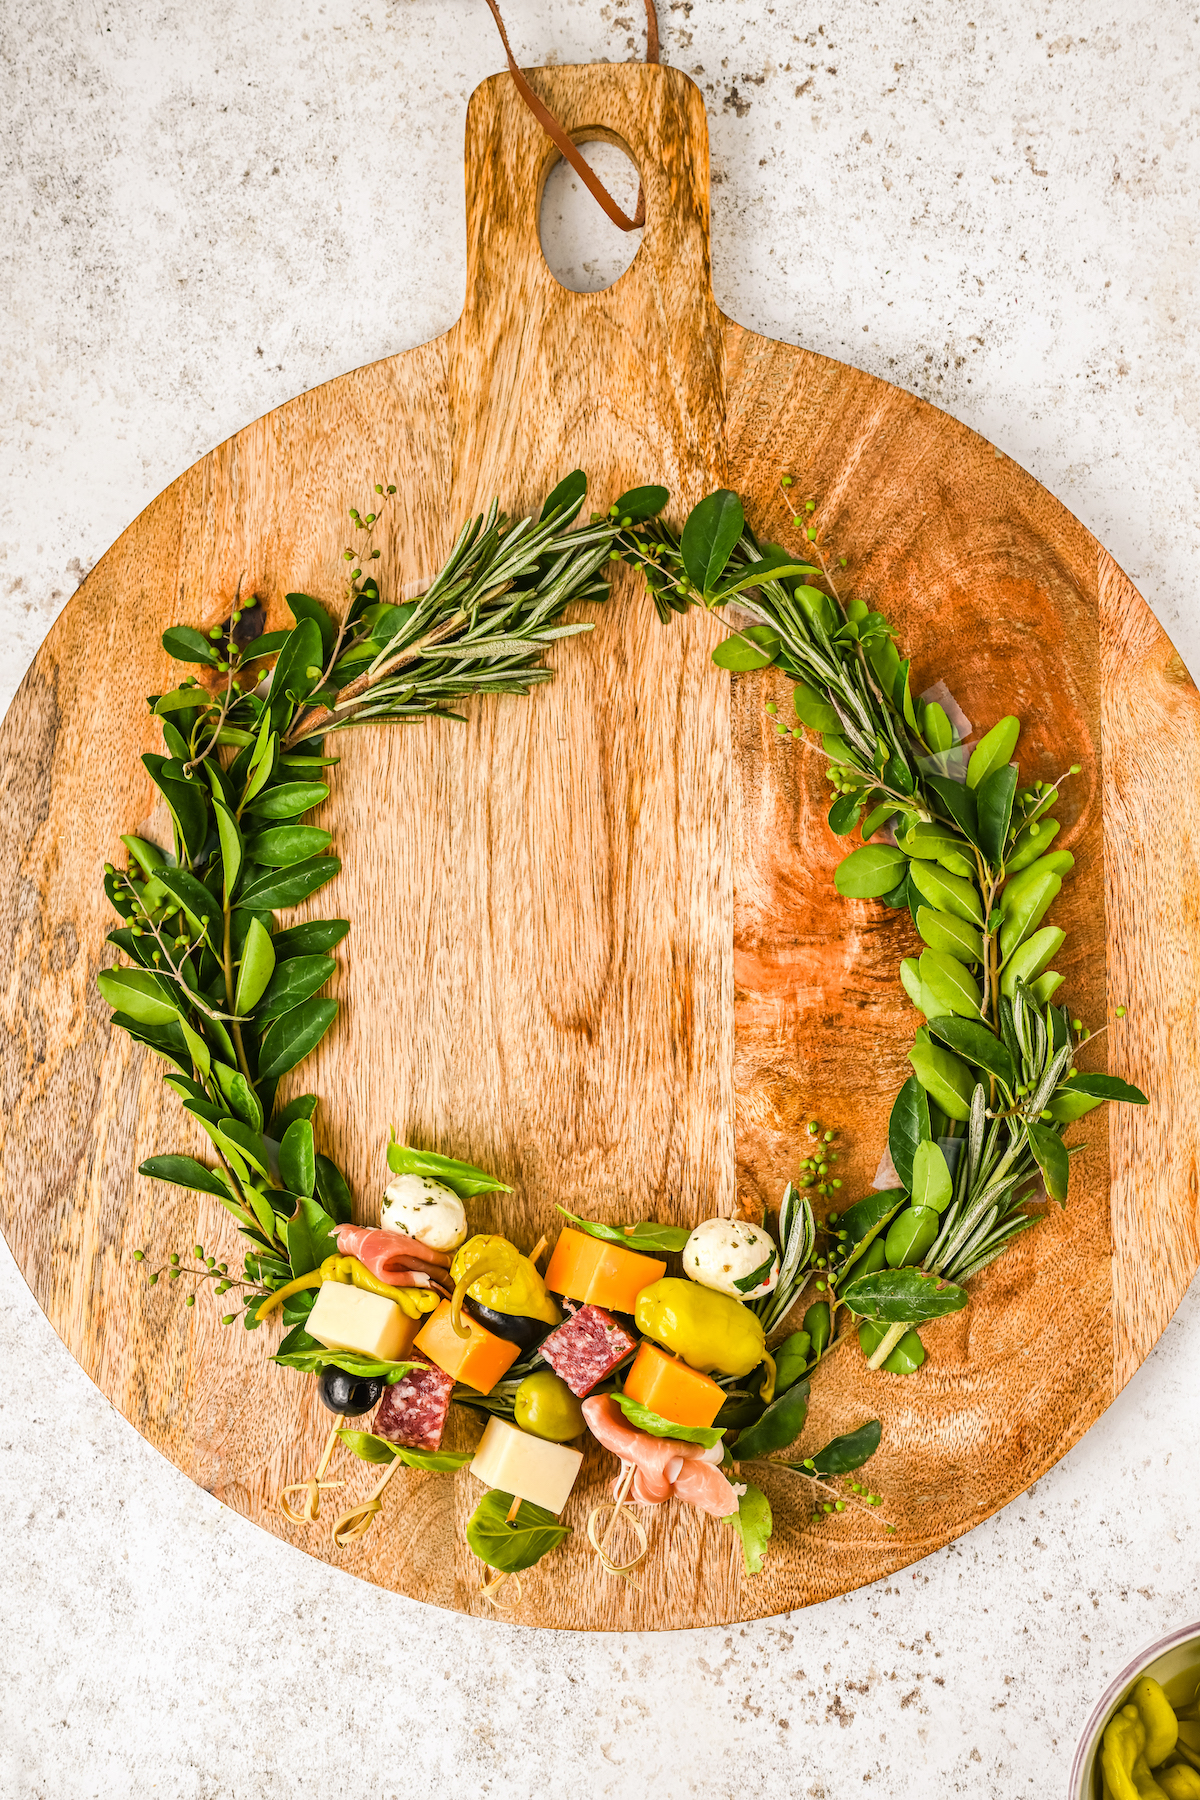 Small skewers of antipasto arranged on a circle of greenery on a cutting board.